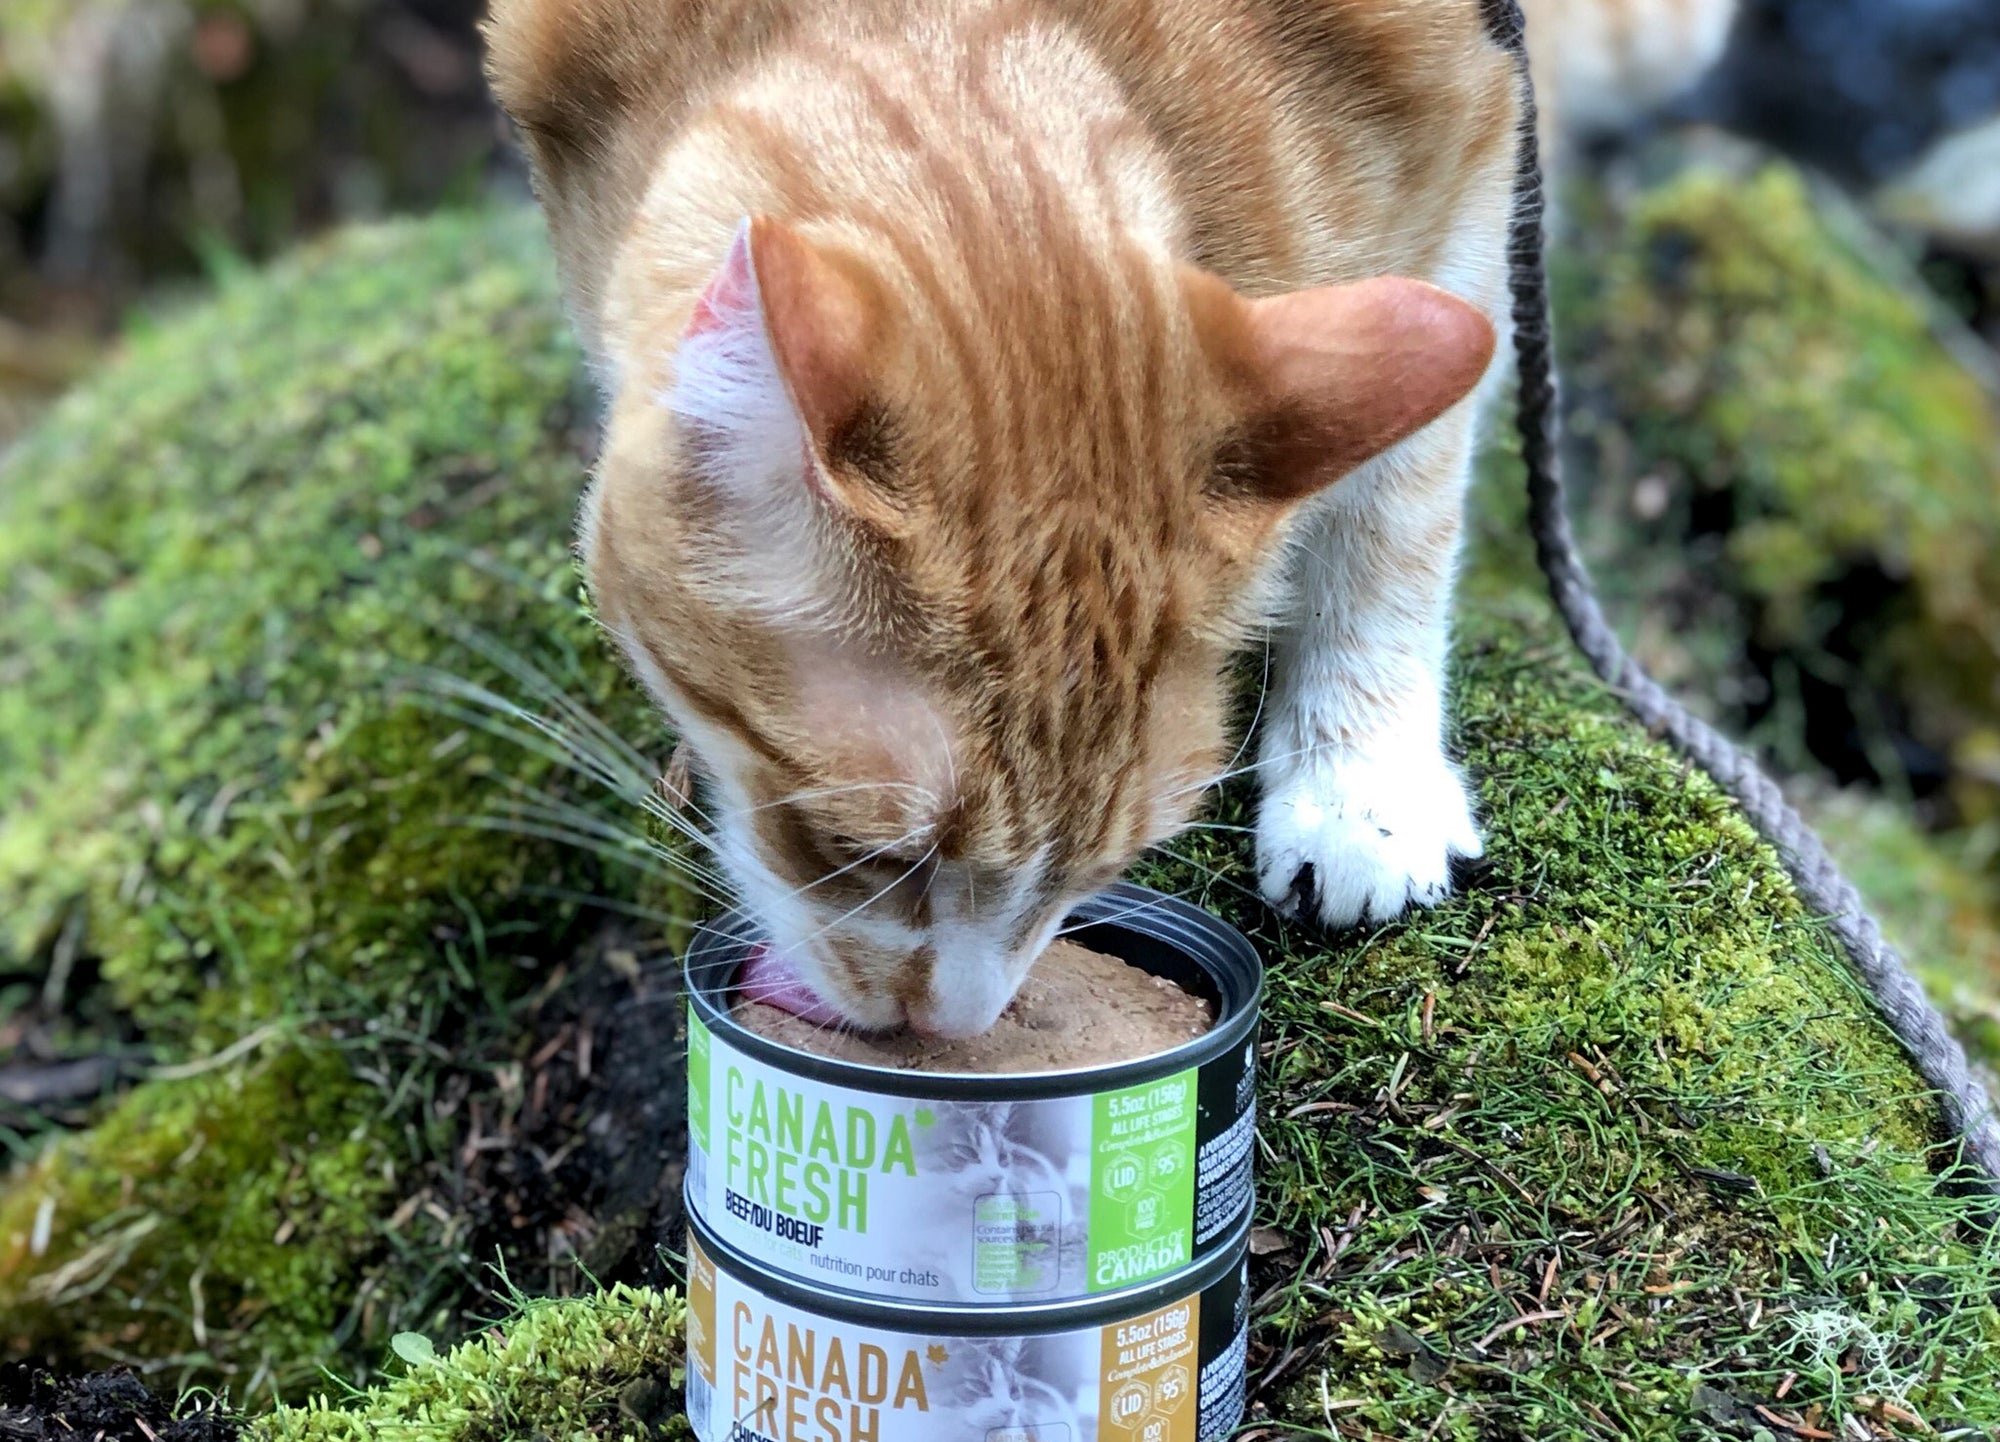 Ginger Tabby cat eating out of a 5.5 oz can of Canada Fresh Beef variant.